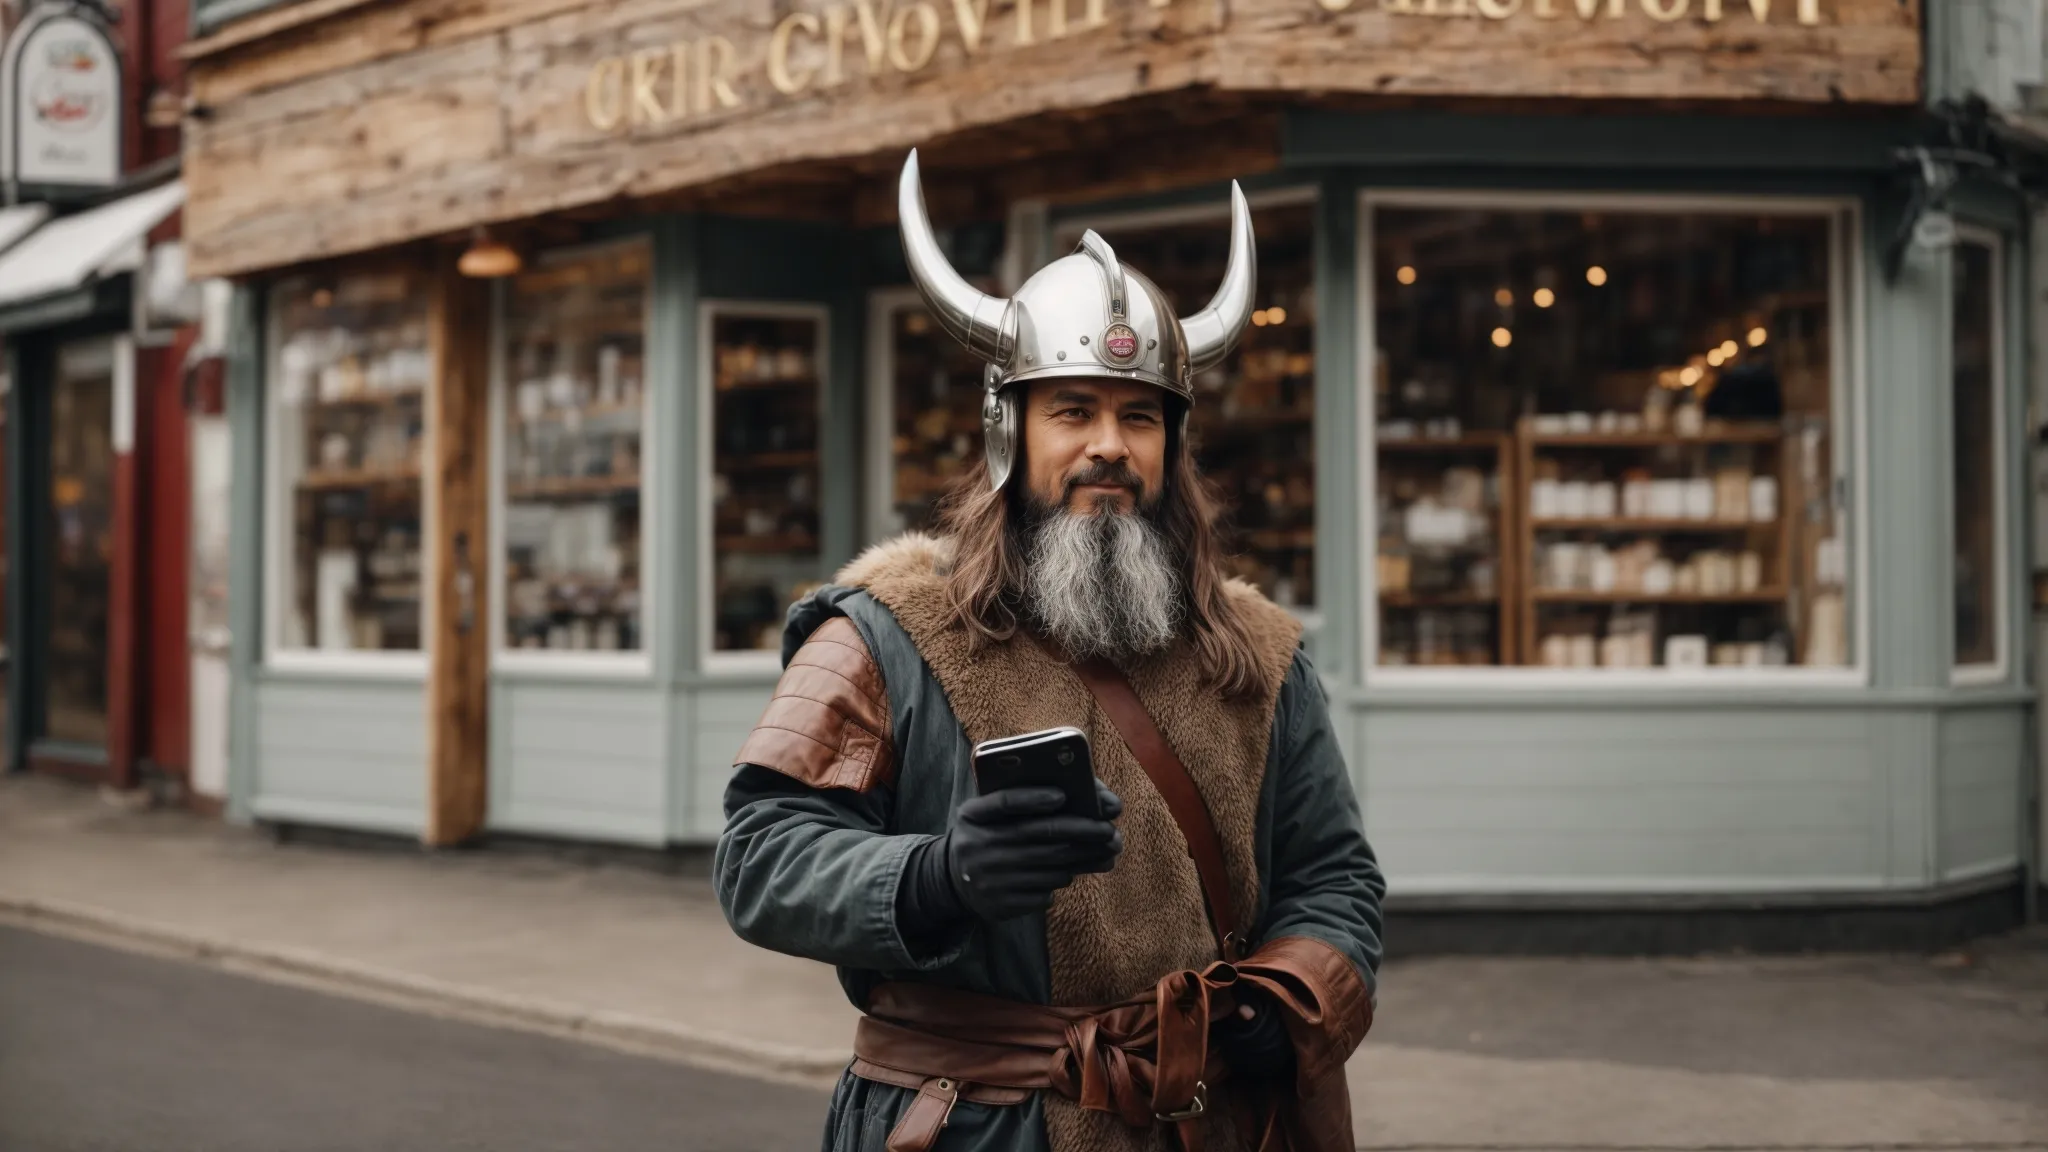 a local business owner in a viking helmet stands outside his shop, holding a smartphone and giving a thumbs-up next to the shop's signpost without any logos.